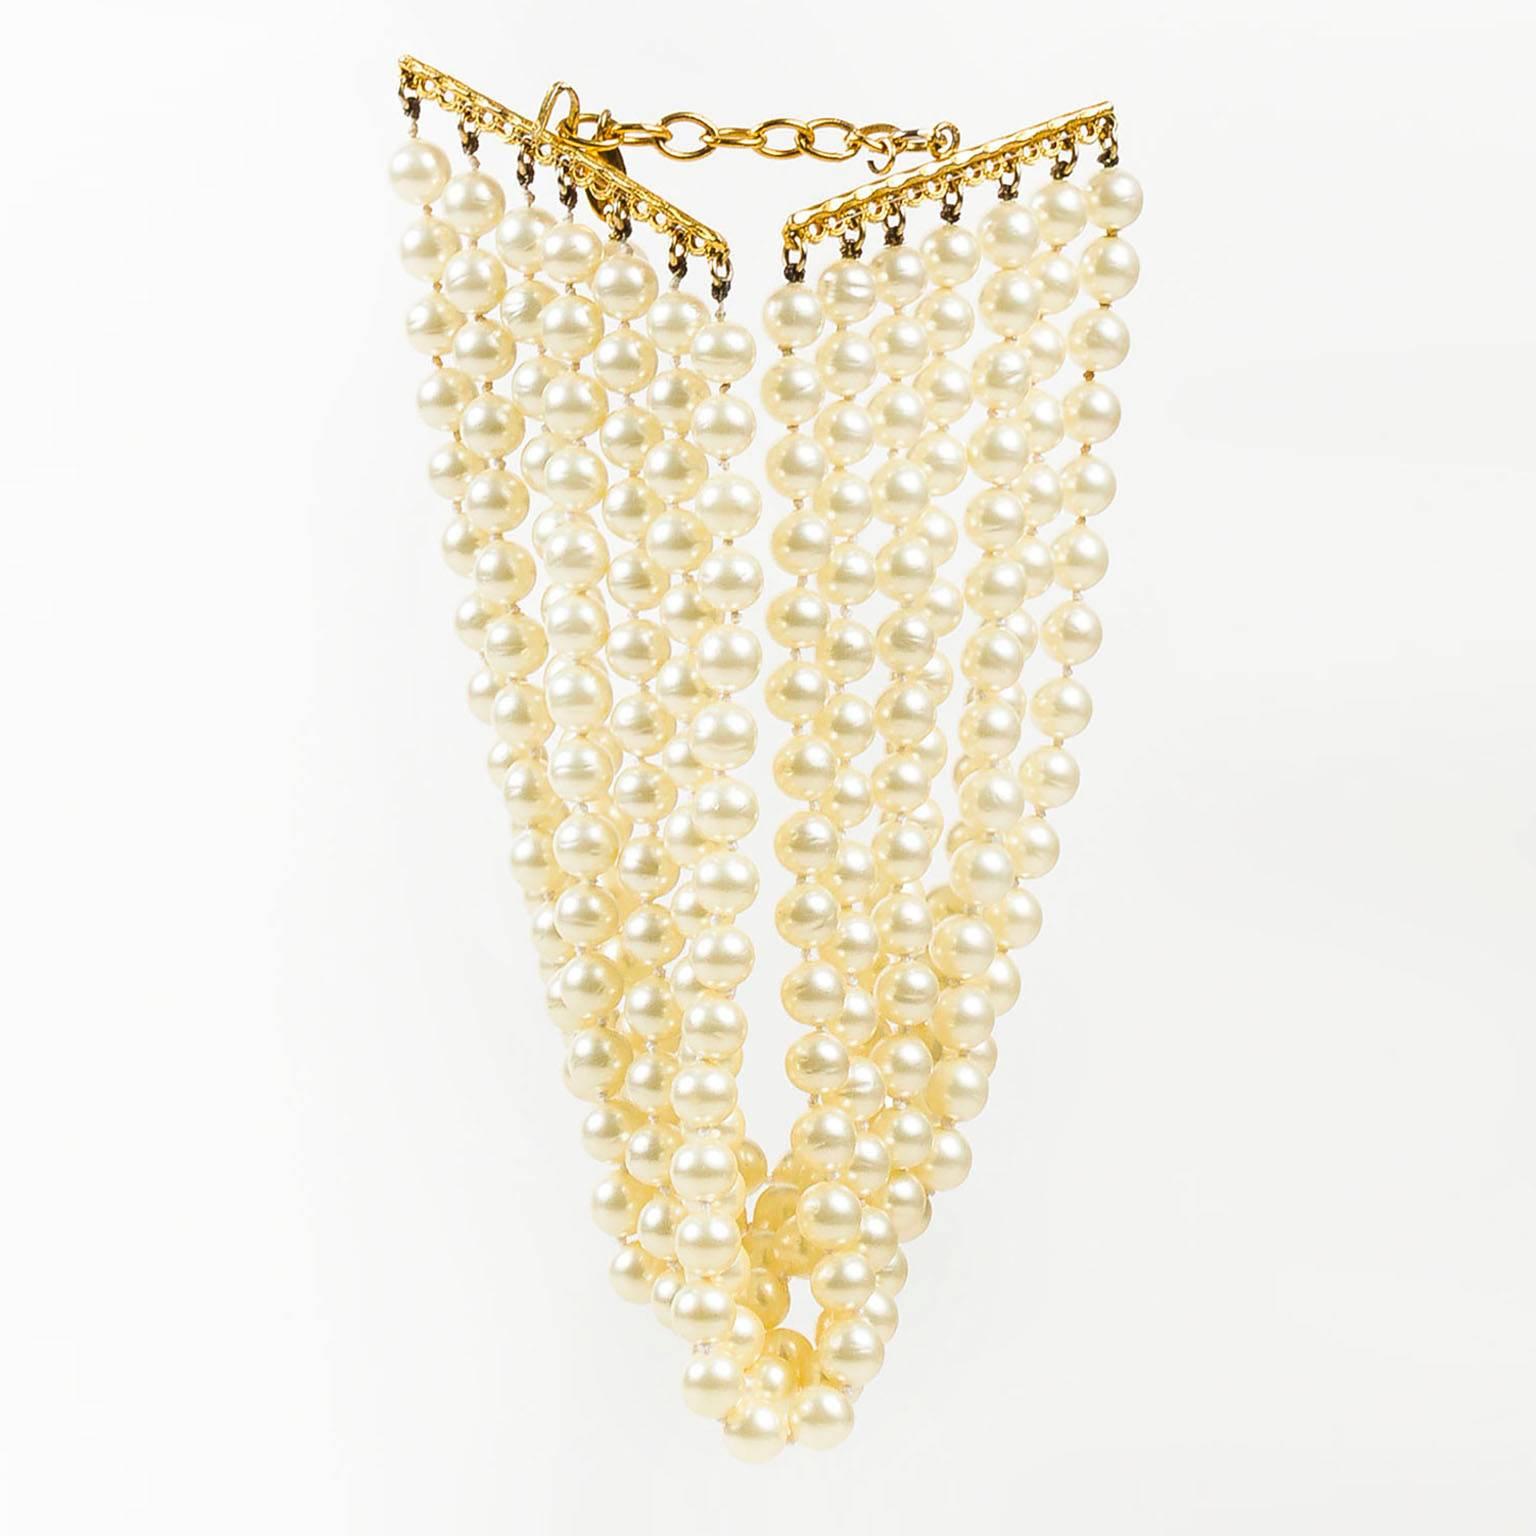 Vintage Chanel choker necklace. This classic piece emulates the sophisticated aesthetic of timeless brand. Add to any ensemble for instant upscale glamour. Multiple strands of faux pearls. Extender for adjustable sizing. Hook fastener.

Additional